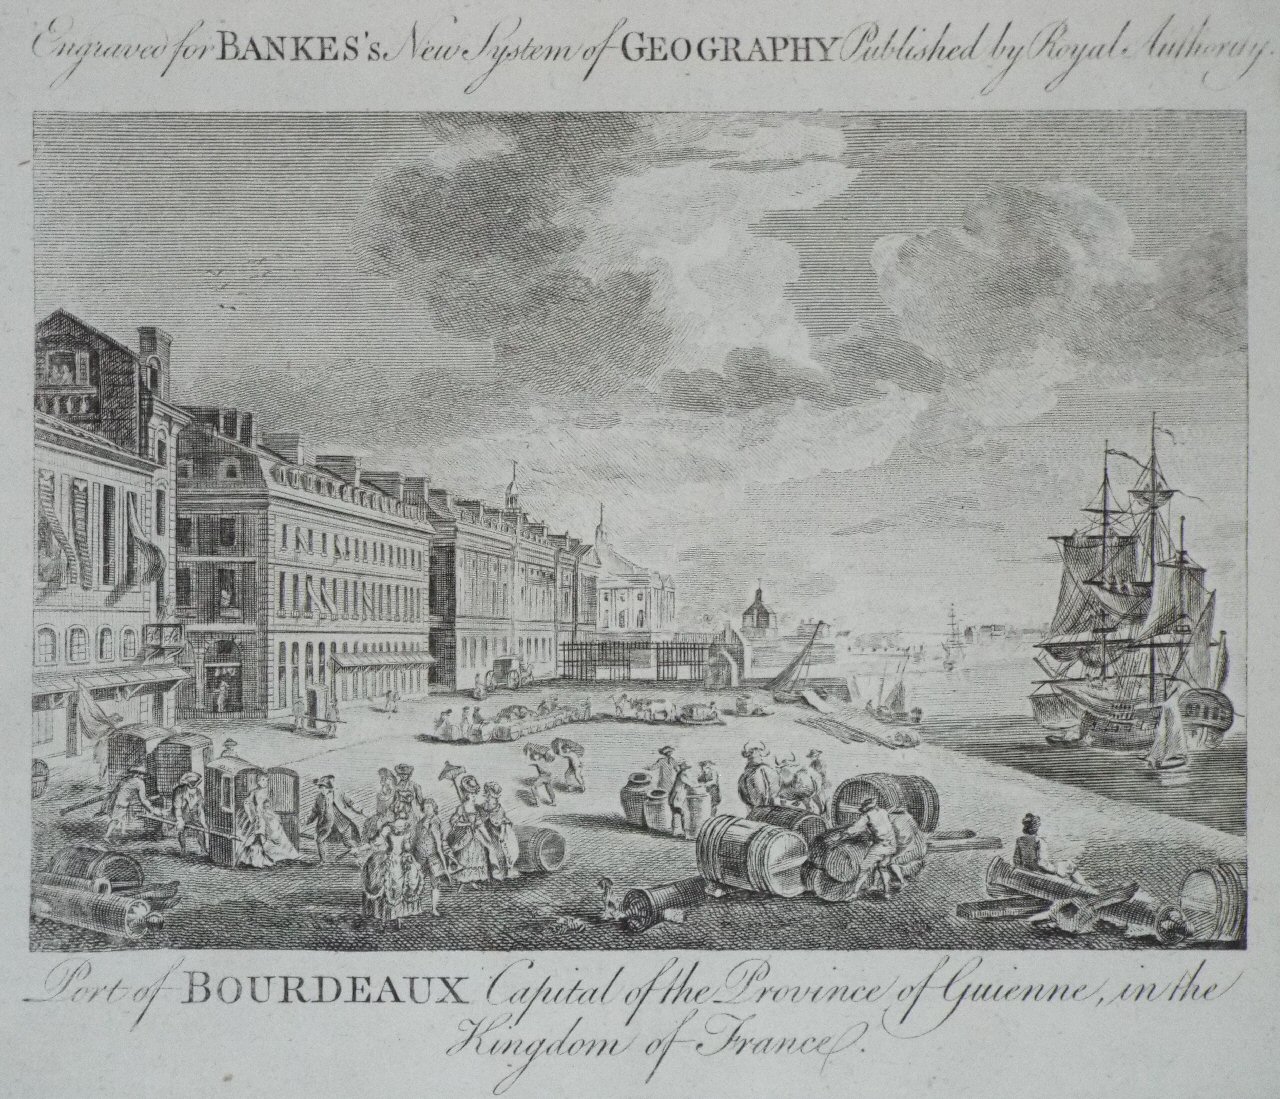 Print - Port of Bordeaux, Capital of the Province of Guienne, in the Kingdom of France.